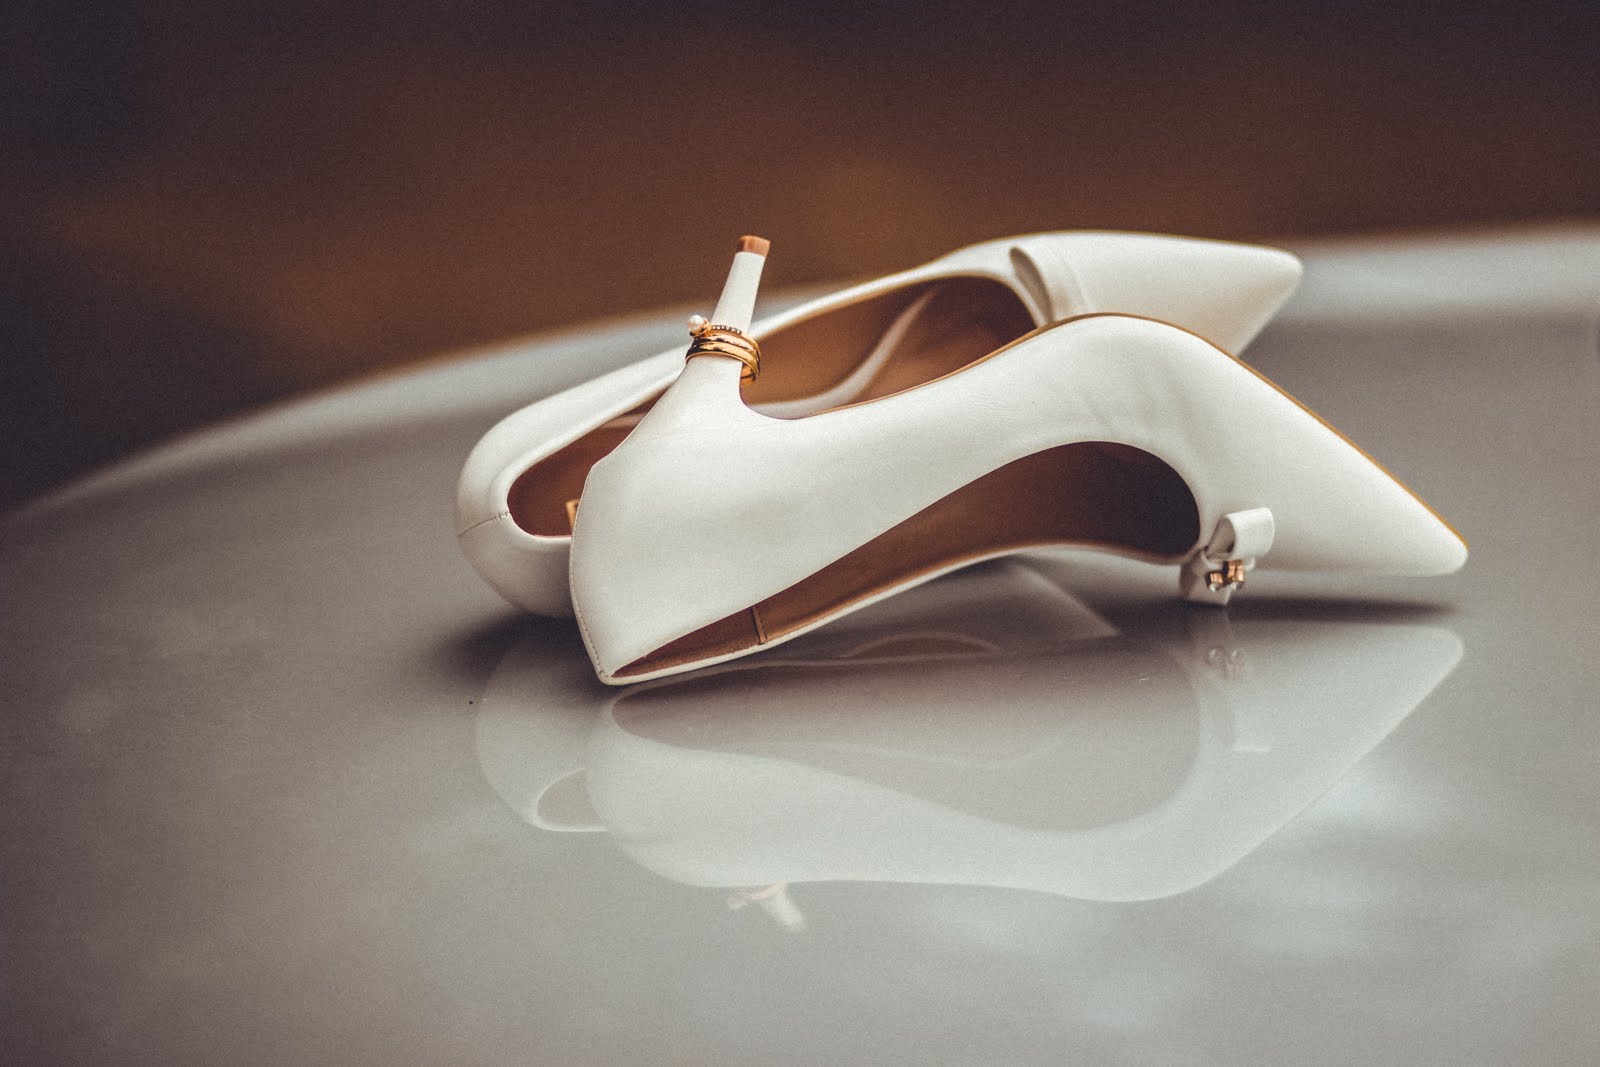 How to Choose Bridal Shoes?